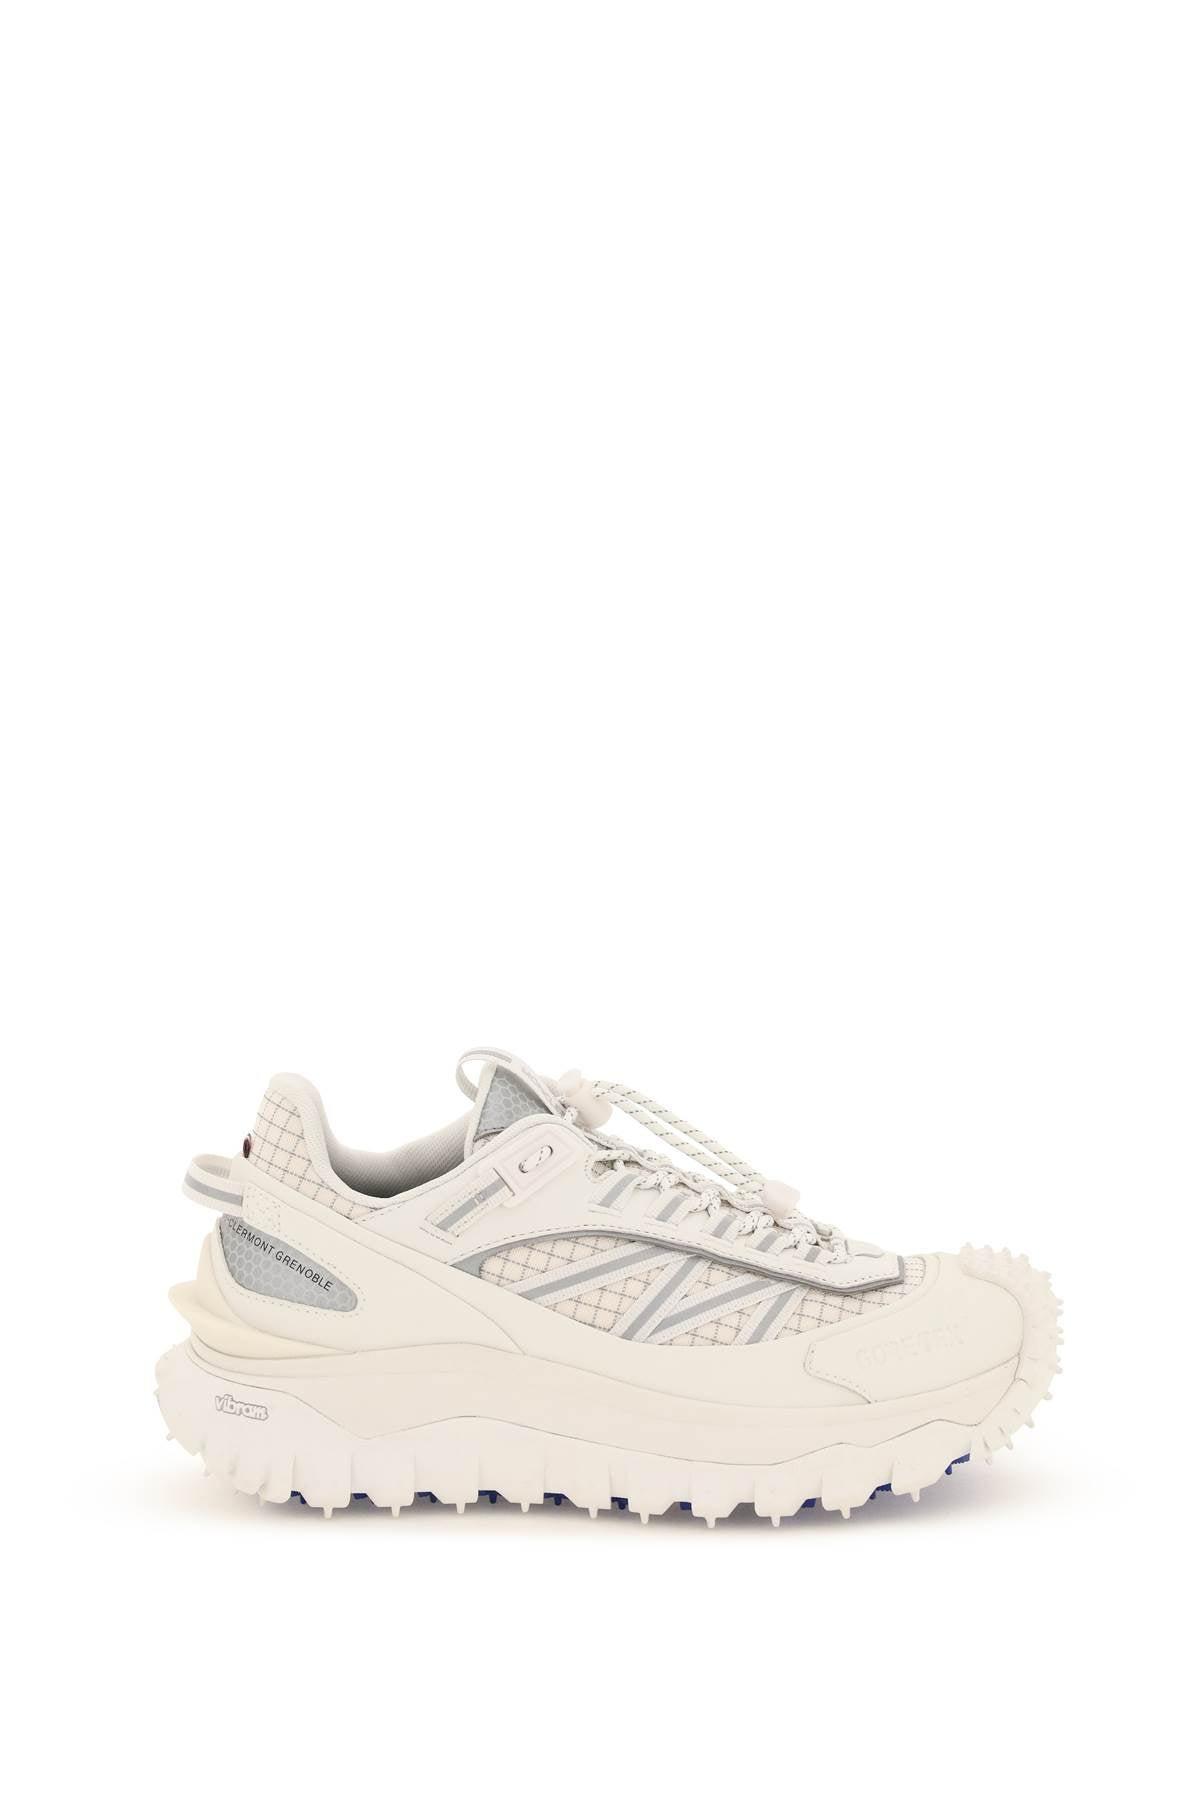 Moncler Trailgrip Gtx Sneakers in White | Lyst